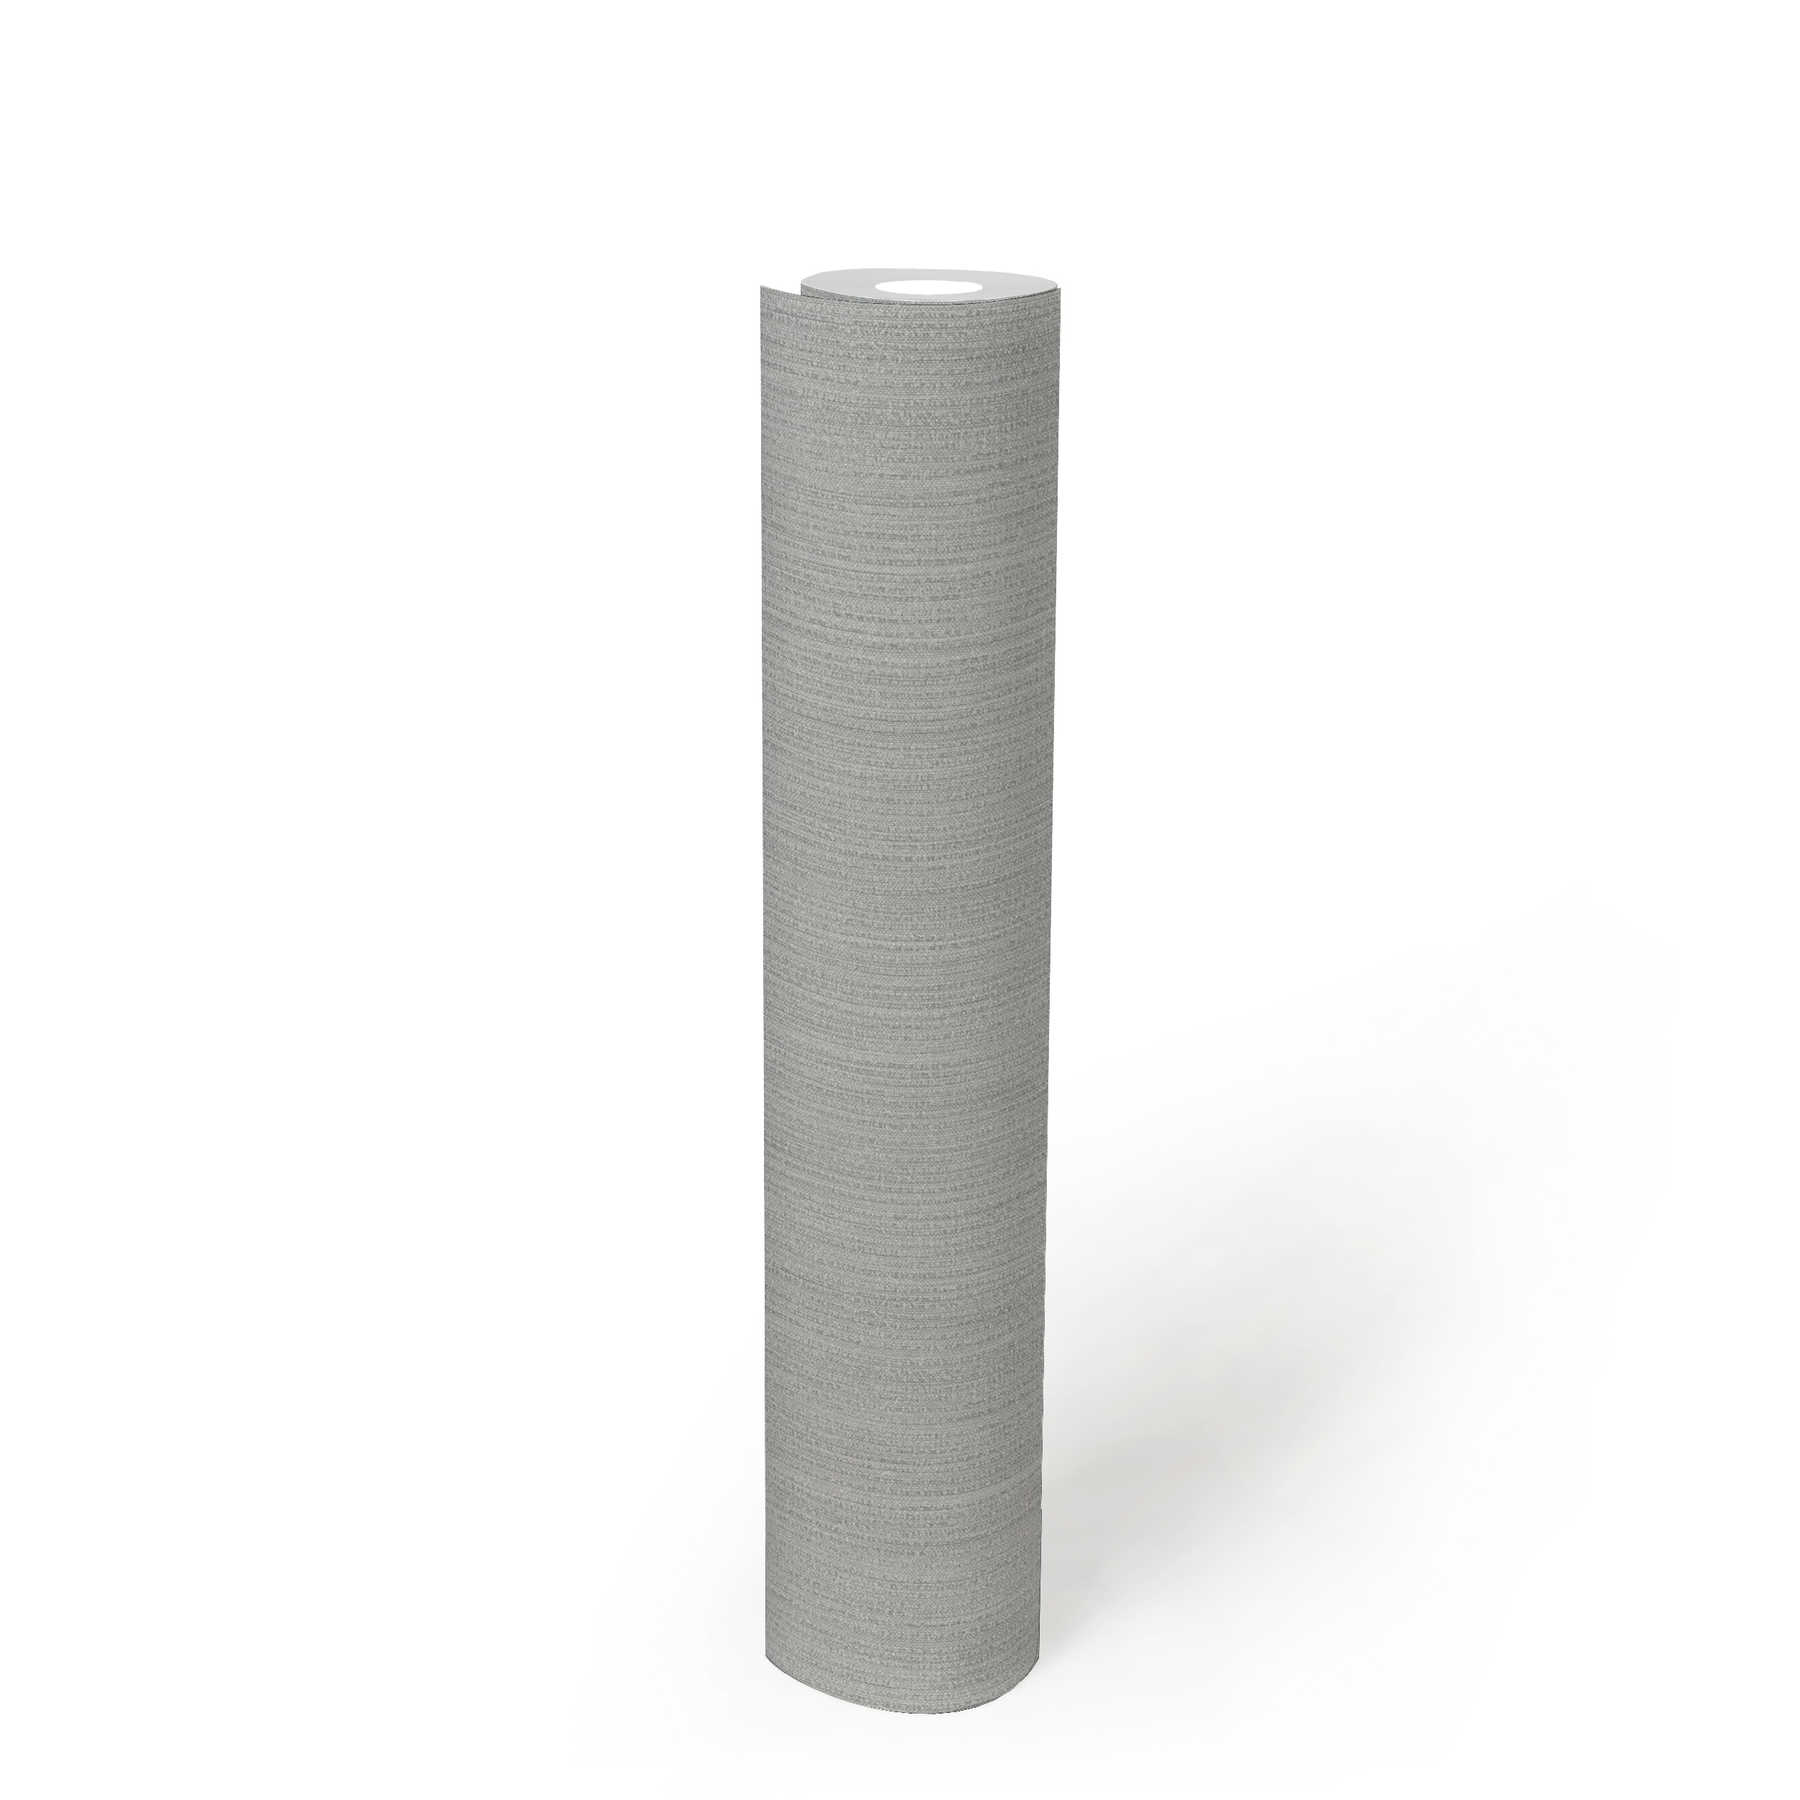             Plain wallpaper MICHALSKY with lined structure pattern - grey
        